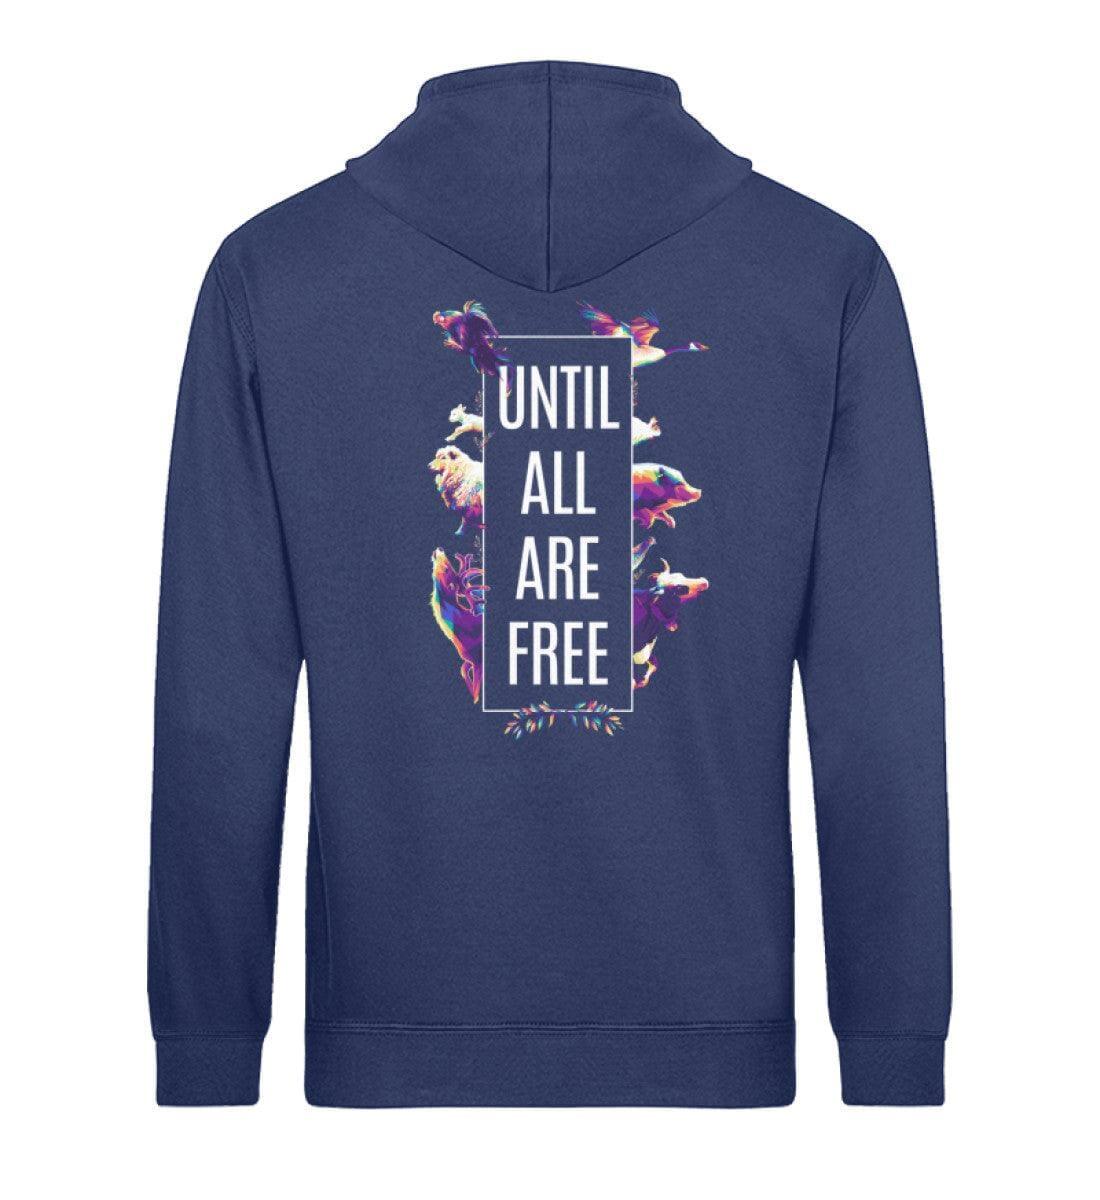 Until all are free - Backprint - Unisex Organic Hoodie Drummer Hoodie ST/ST Shirtee French Navy XS 